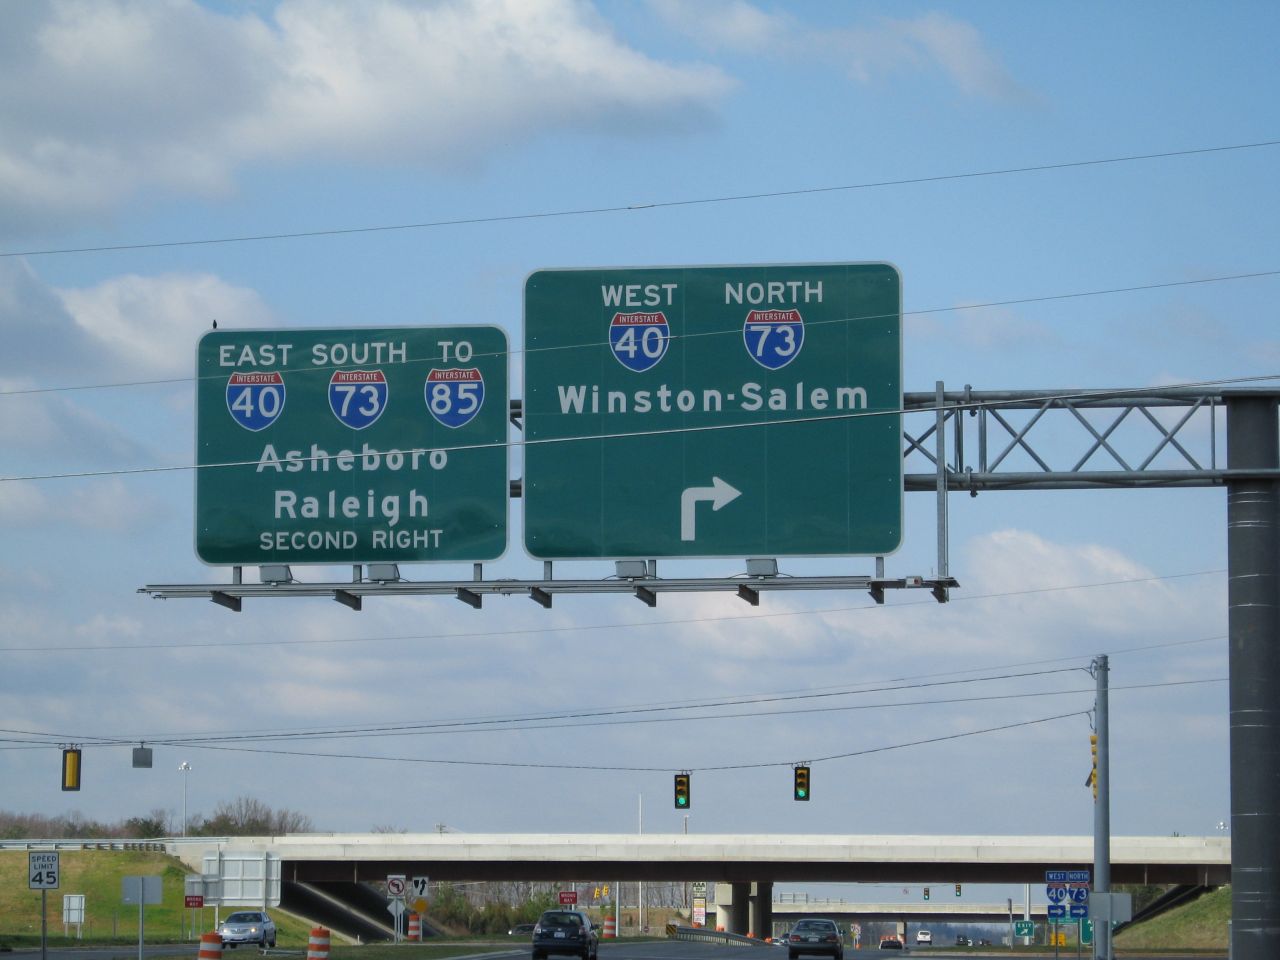 Photo of exit signage at Greensboro Loop Wendover Ave Interchange in March 
2008